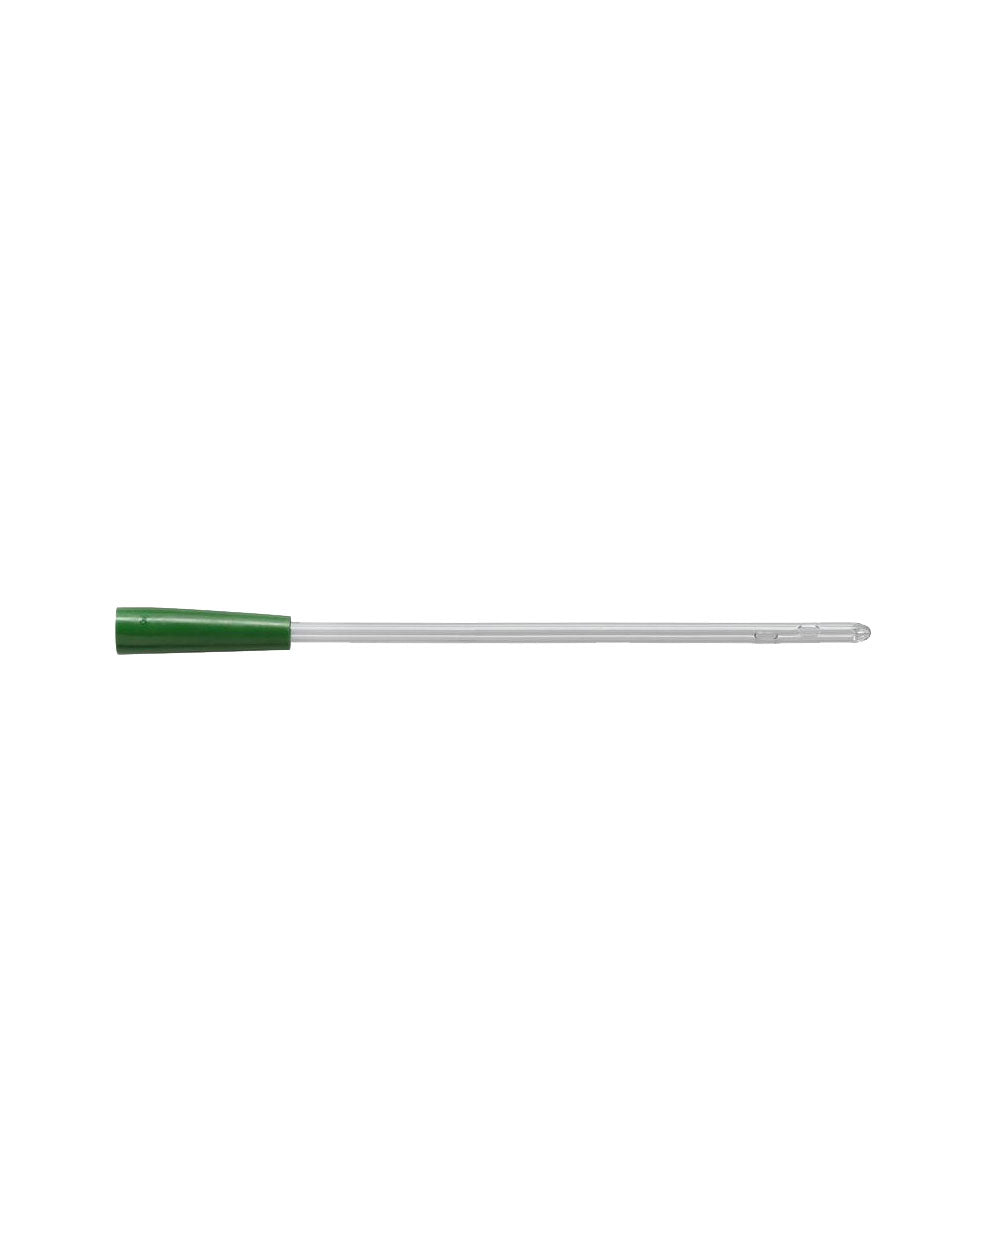 Coloplast Self-Cath Urethral Catheter Male Coude Olive with Guide Stripe 812  12FR 16" (40cm) - 30 Per Box